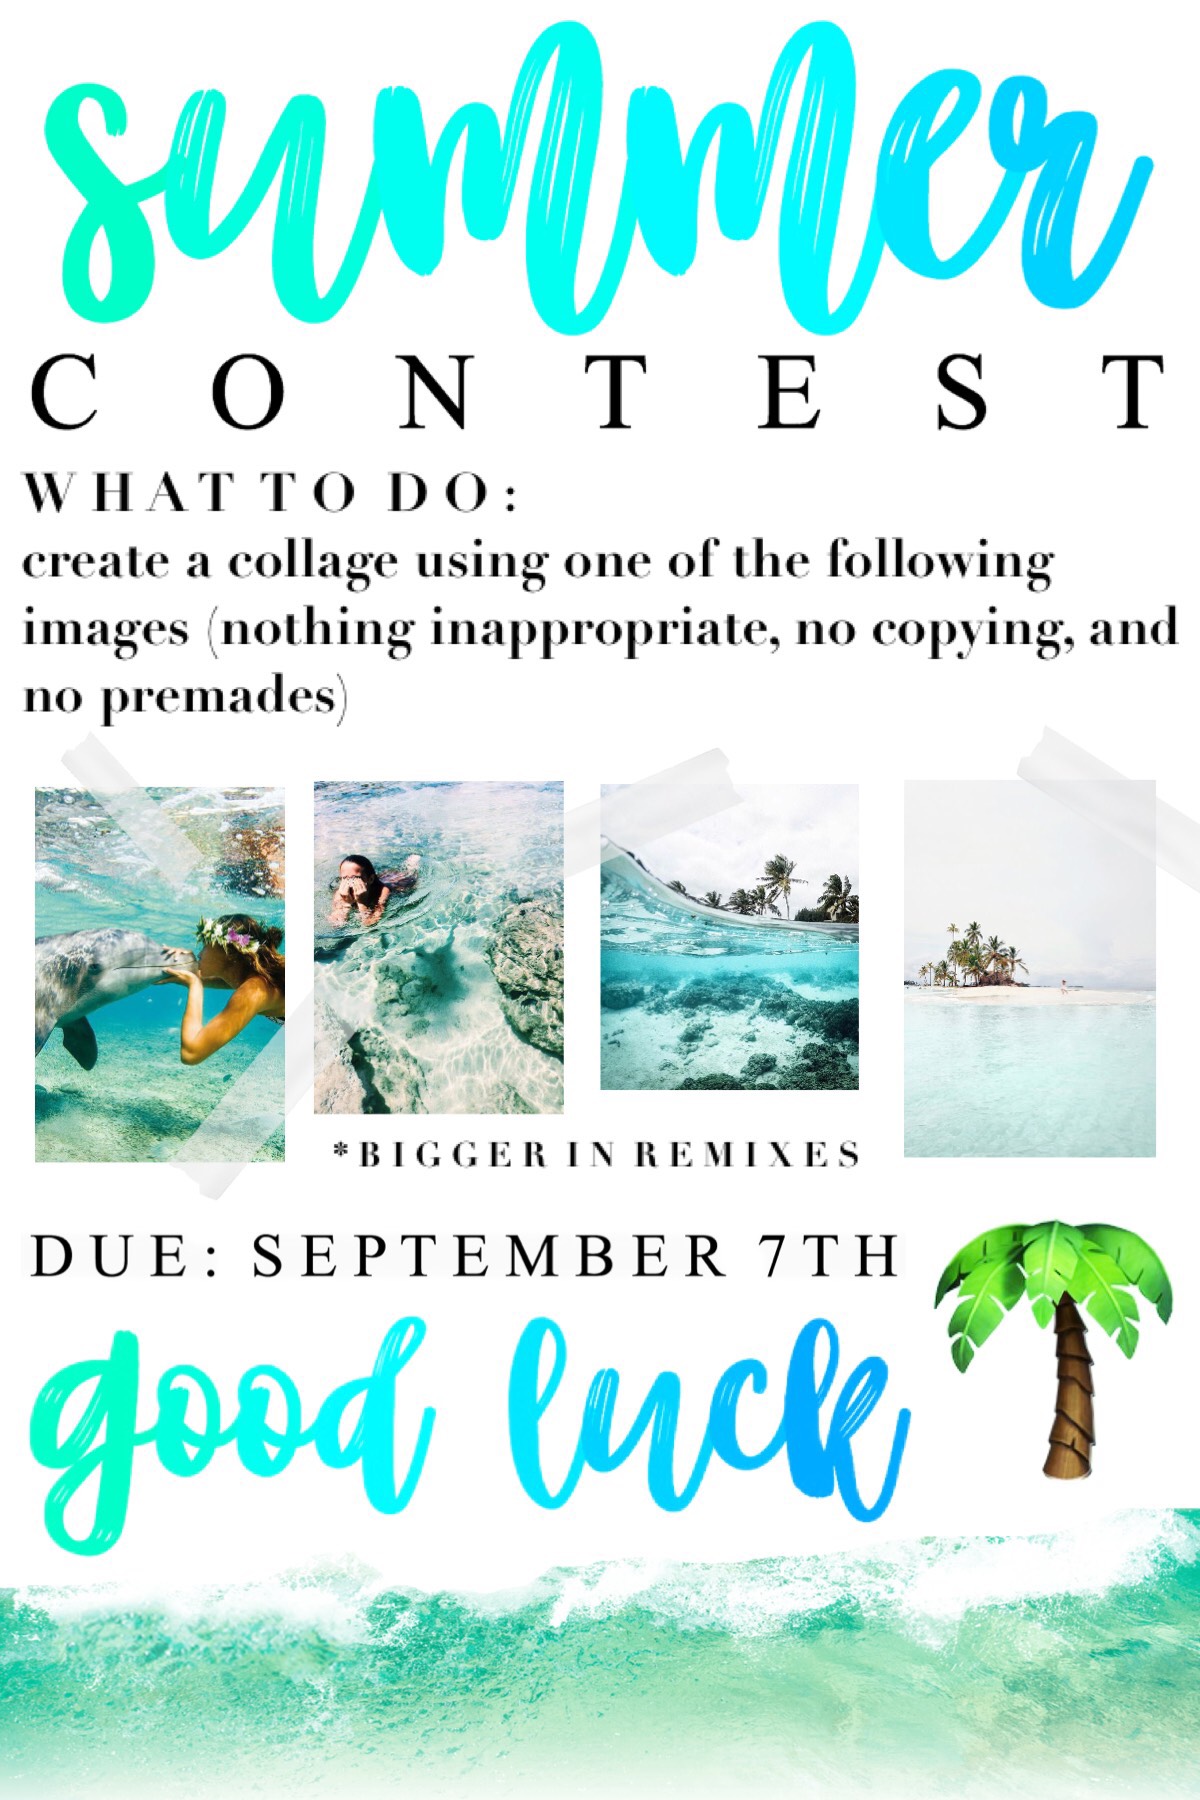 🌴 t a p 🌴
my first contest!
let me know if you have any questions💖